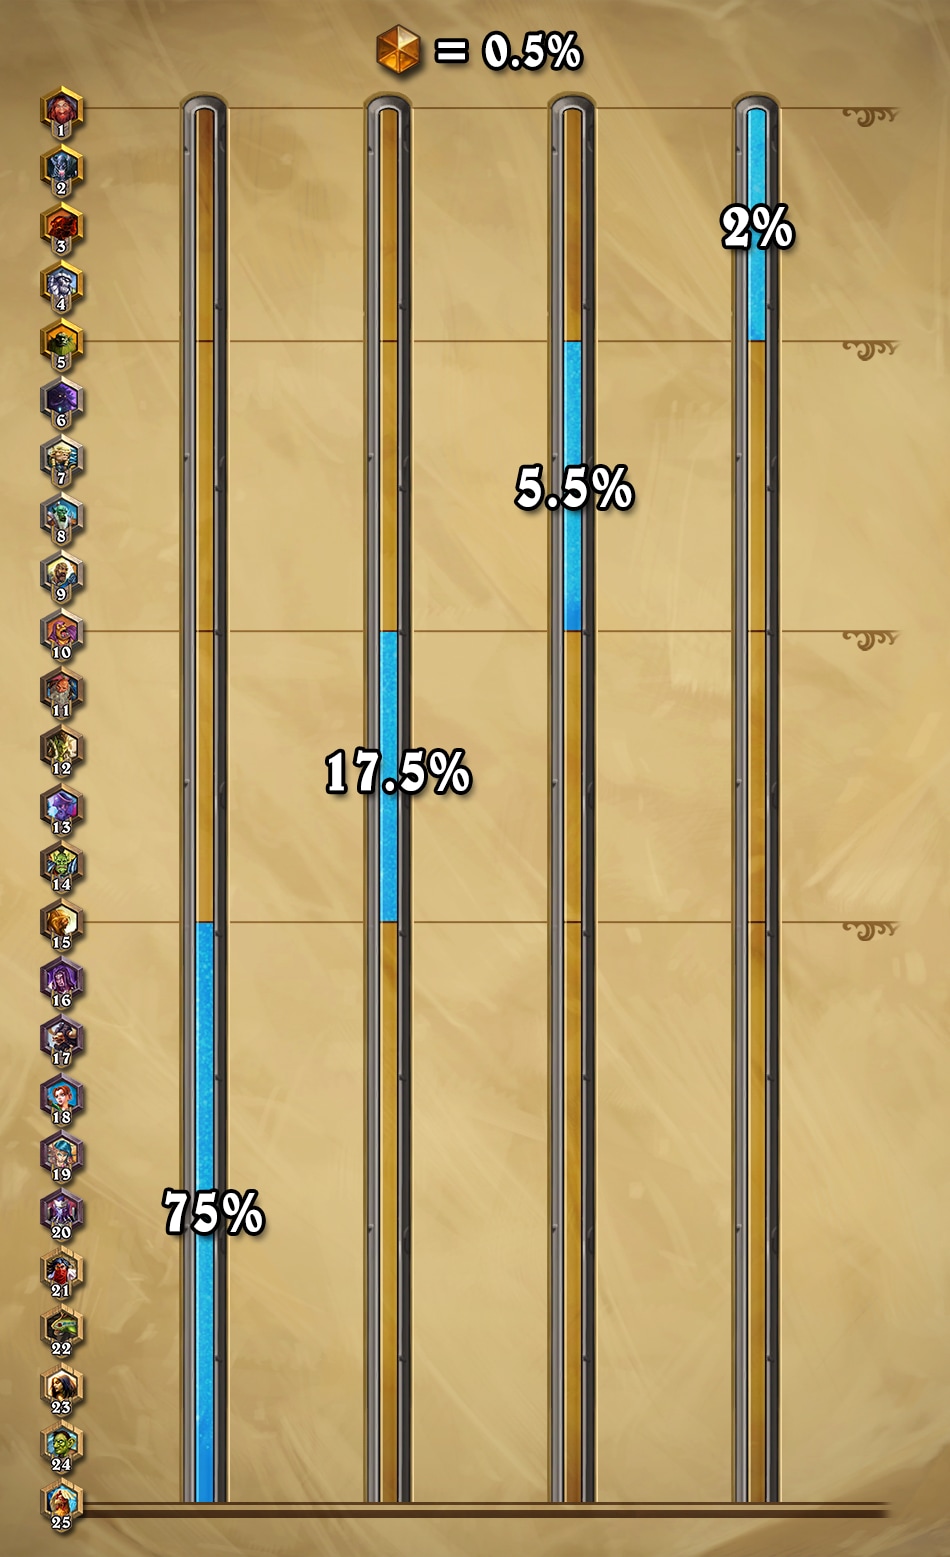 Top ladders players suspect ELO boosting in Battlegrounds : r/hearthstone